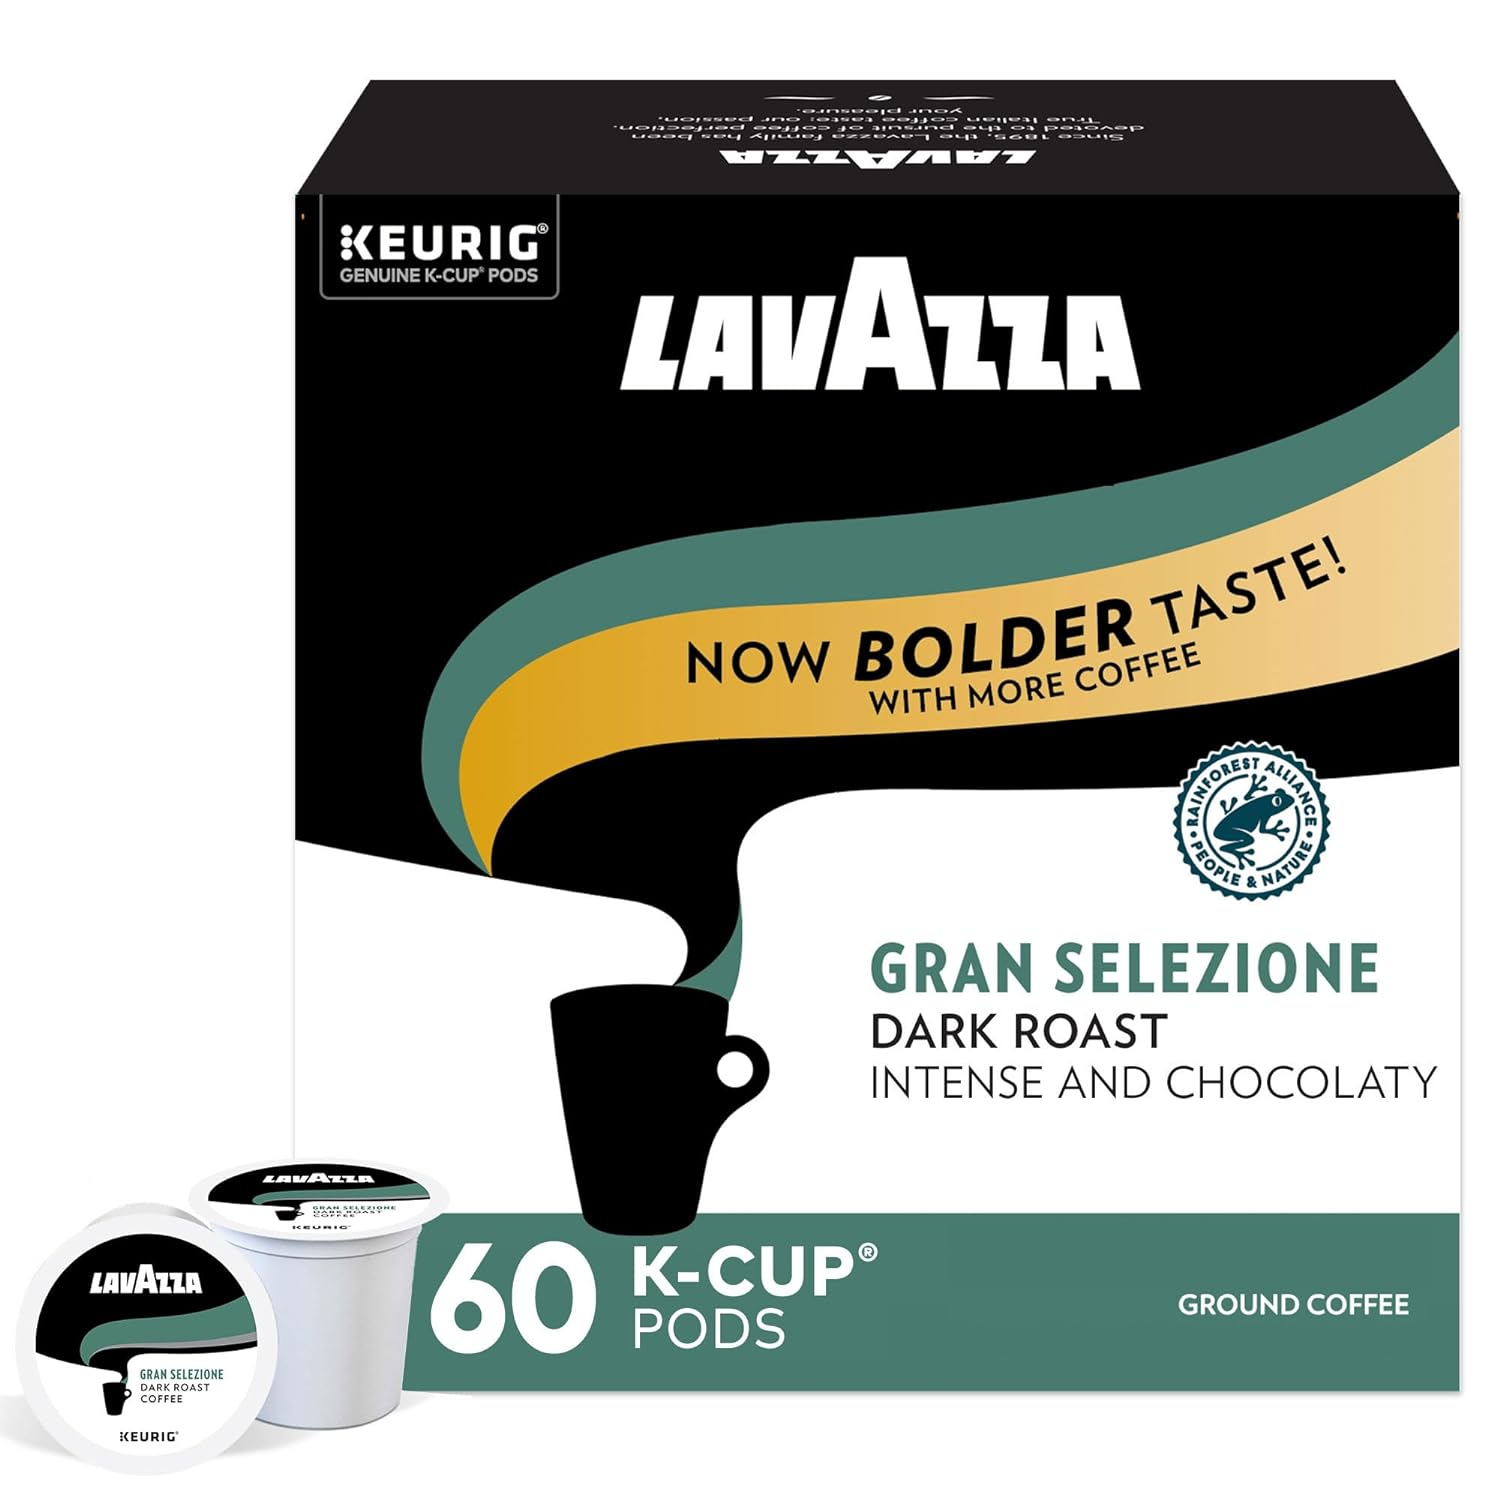 Lavazza Gran Selezione Single-Serve Coffee K-Cup® Pods for Keurig® Brewer, Dark Roast, 10 Count Box, (Pack Of 6) $16.62